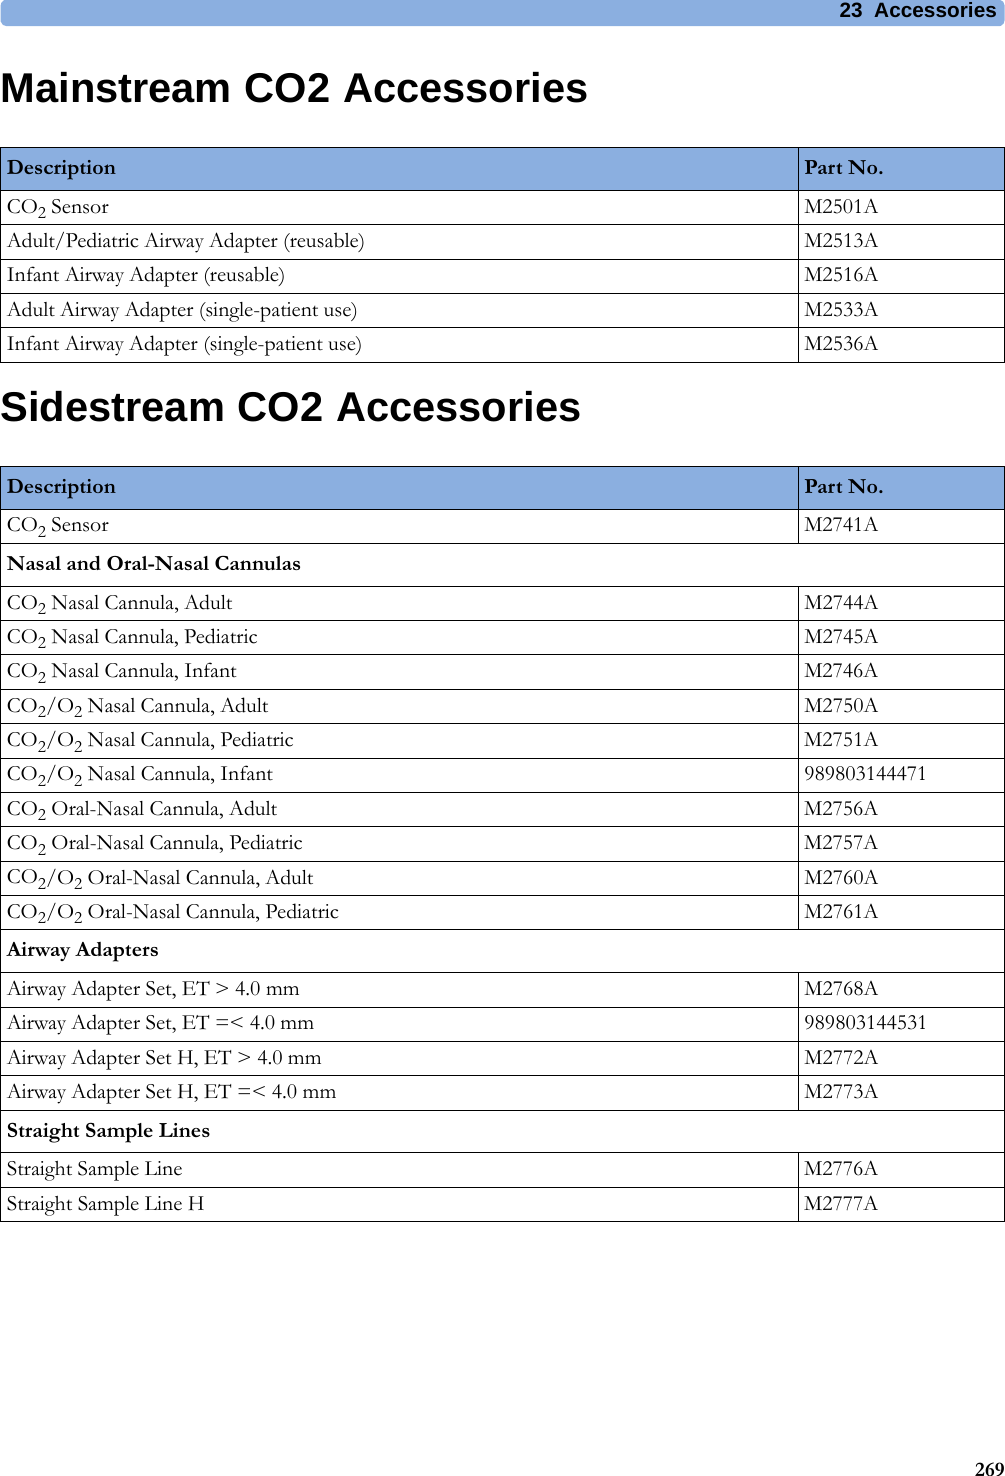 23 Accessories269Mainstream CO2 AccessoriesSidestream CO2 AccessoriesDescription Part No.CO2 Sensor M2501AAdult/Pediatric Airway Adapter (reusable) M2513AInfant Airway Adapter (reusable) M2516AAdult Airway Adapter (single-patient use) M2533AInfant Airway Adapter (single-patient use) M2536ADescription Part No.CO2 Sensor M2741ANasal and Oral-Nasal CannulasCO2 Nasal Cannula, Adult M2744ACO2 Nasal Cannula, Pediatric M2745ACO2 Nasal Cannula, Infant M2746ACO2/O2 Nasal Cannula, Adult M2750ACO2/O2 Nasal Cannula, Pediatric M2751ACO2/O2 Nasal Cannula, Infant 989803144471CO2 Oral-Nasal Cannula, Adult M2756ACO2 Oral-Nasal Cannula, Pediatric M2757ACO2/O2 Oral-Nasal Cannula, Adult M2760ACO2/O2 Oral-Nasal Cannula, Pediatric M2761AAirway AdaptersAirway Adapter Set, ET &gt; 4.0 mm M2768AAirway Adapter Set, ET =&lt; 4.0 mm 989803144531Airway Adapter Set H, ET &gt; 4.0 mm M2772AAirway Adapter Set H, ET =&lt; 4.0 mm M2773AStraight Sample LinesStraight Sample Line M2776AStraight Sample Line H M2777A